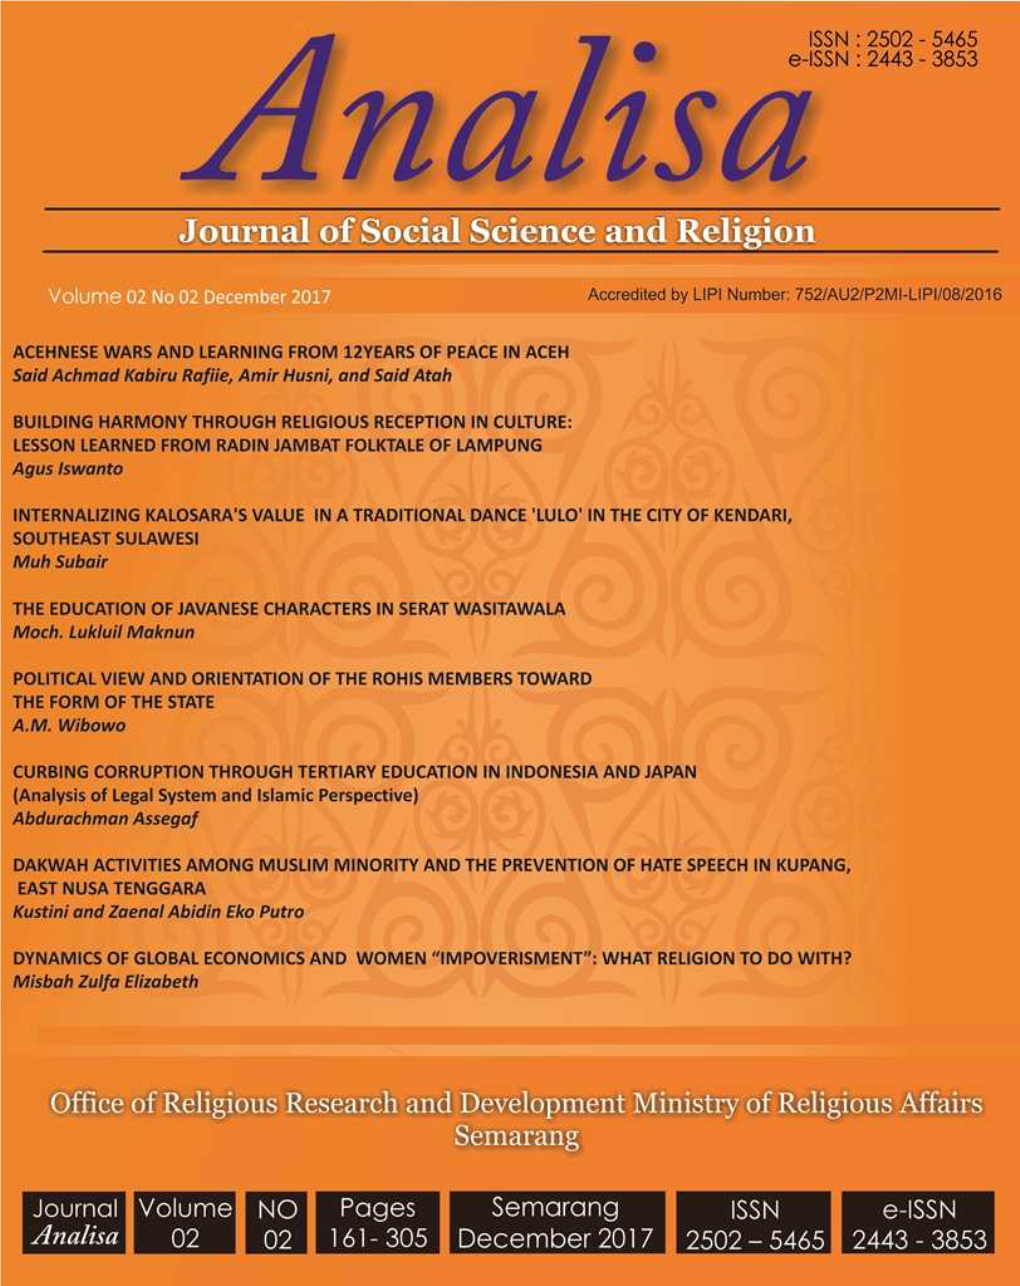 Analisa Journal of Social Science and Religion